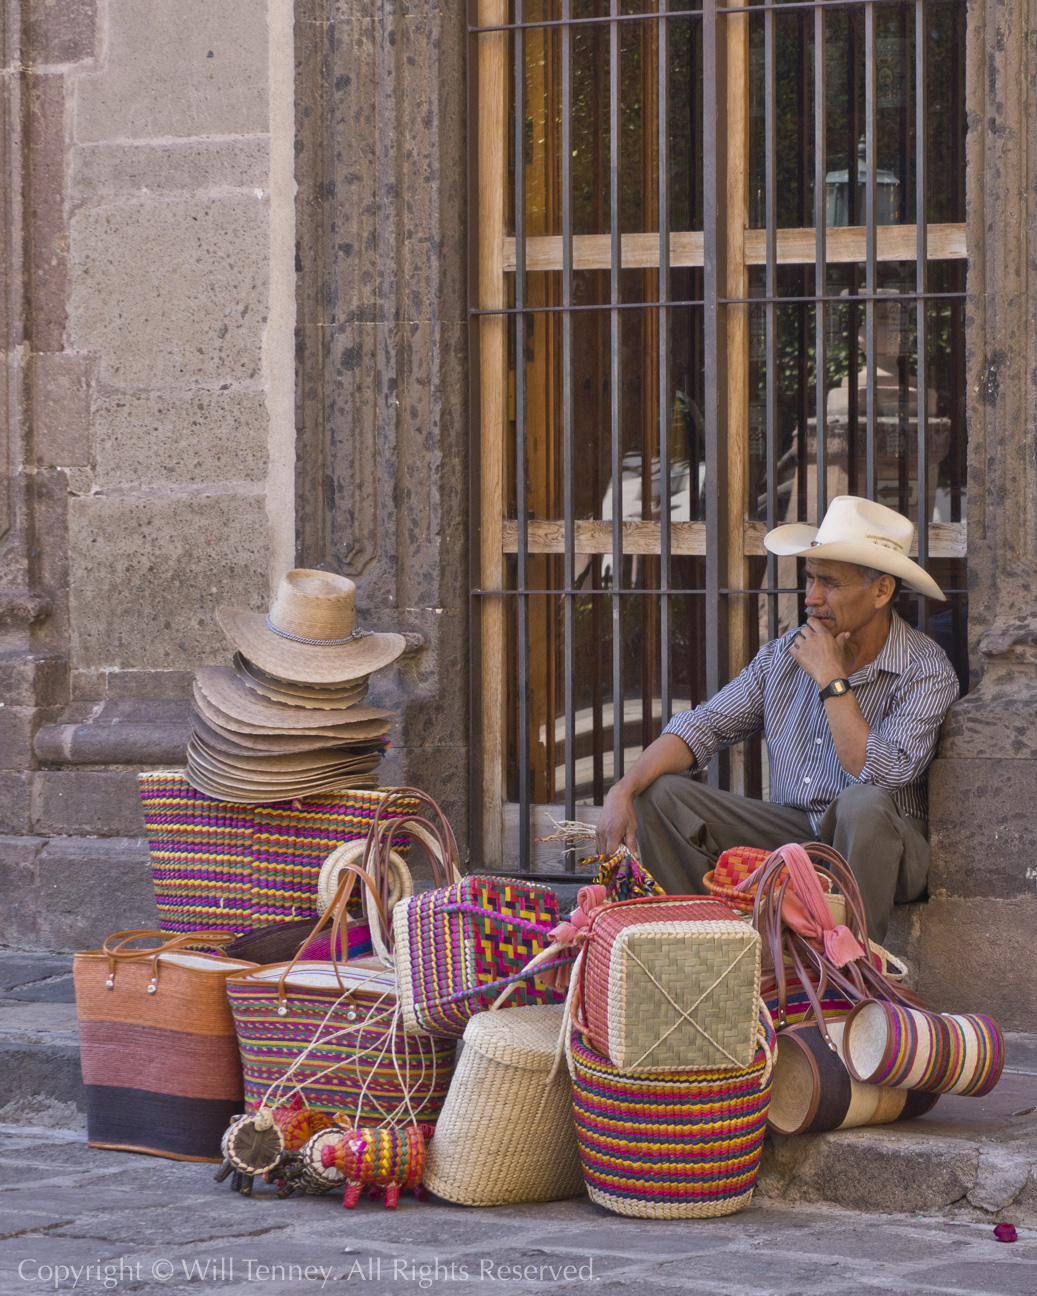 Basket Vendor: Photograph by Will Tenney